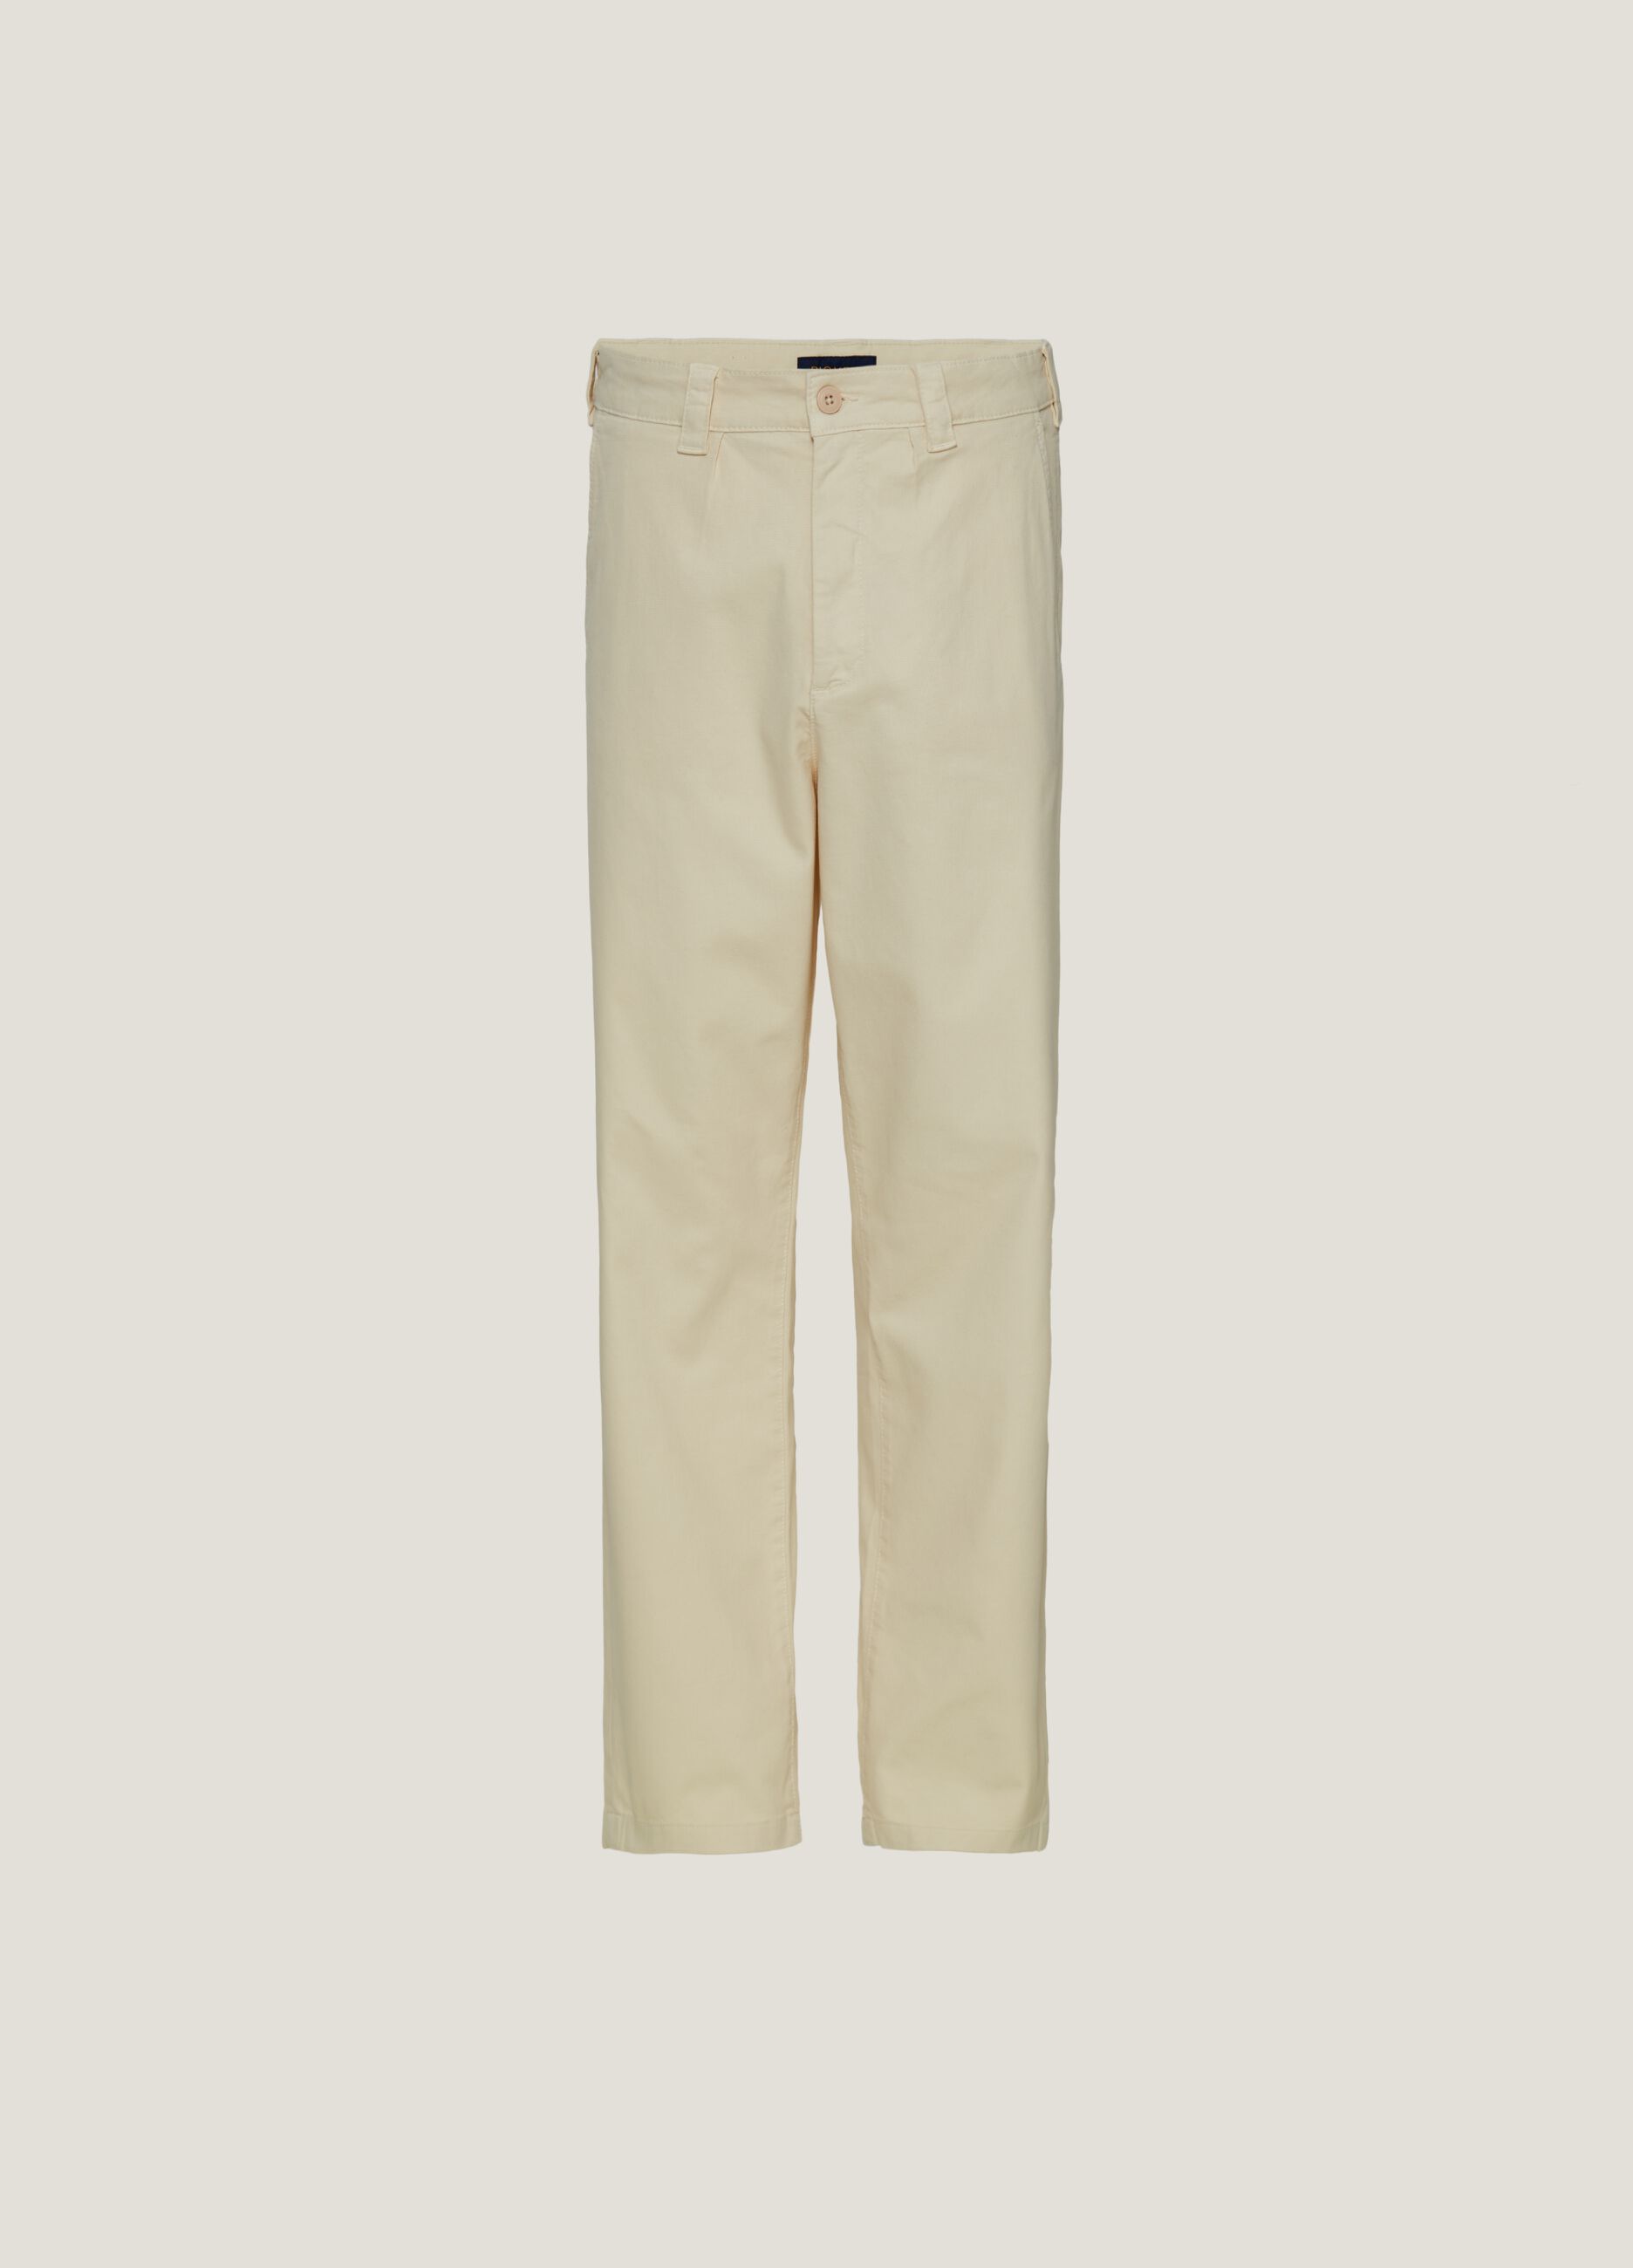 Solid colour chinos